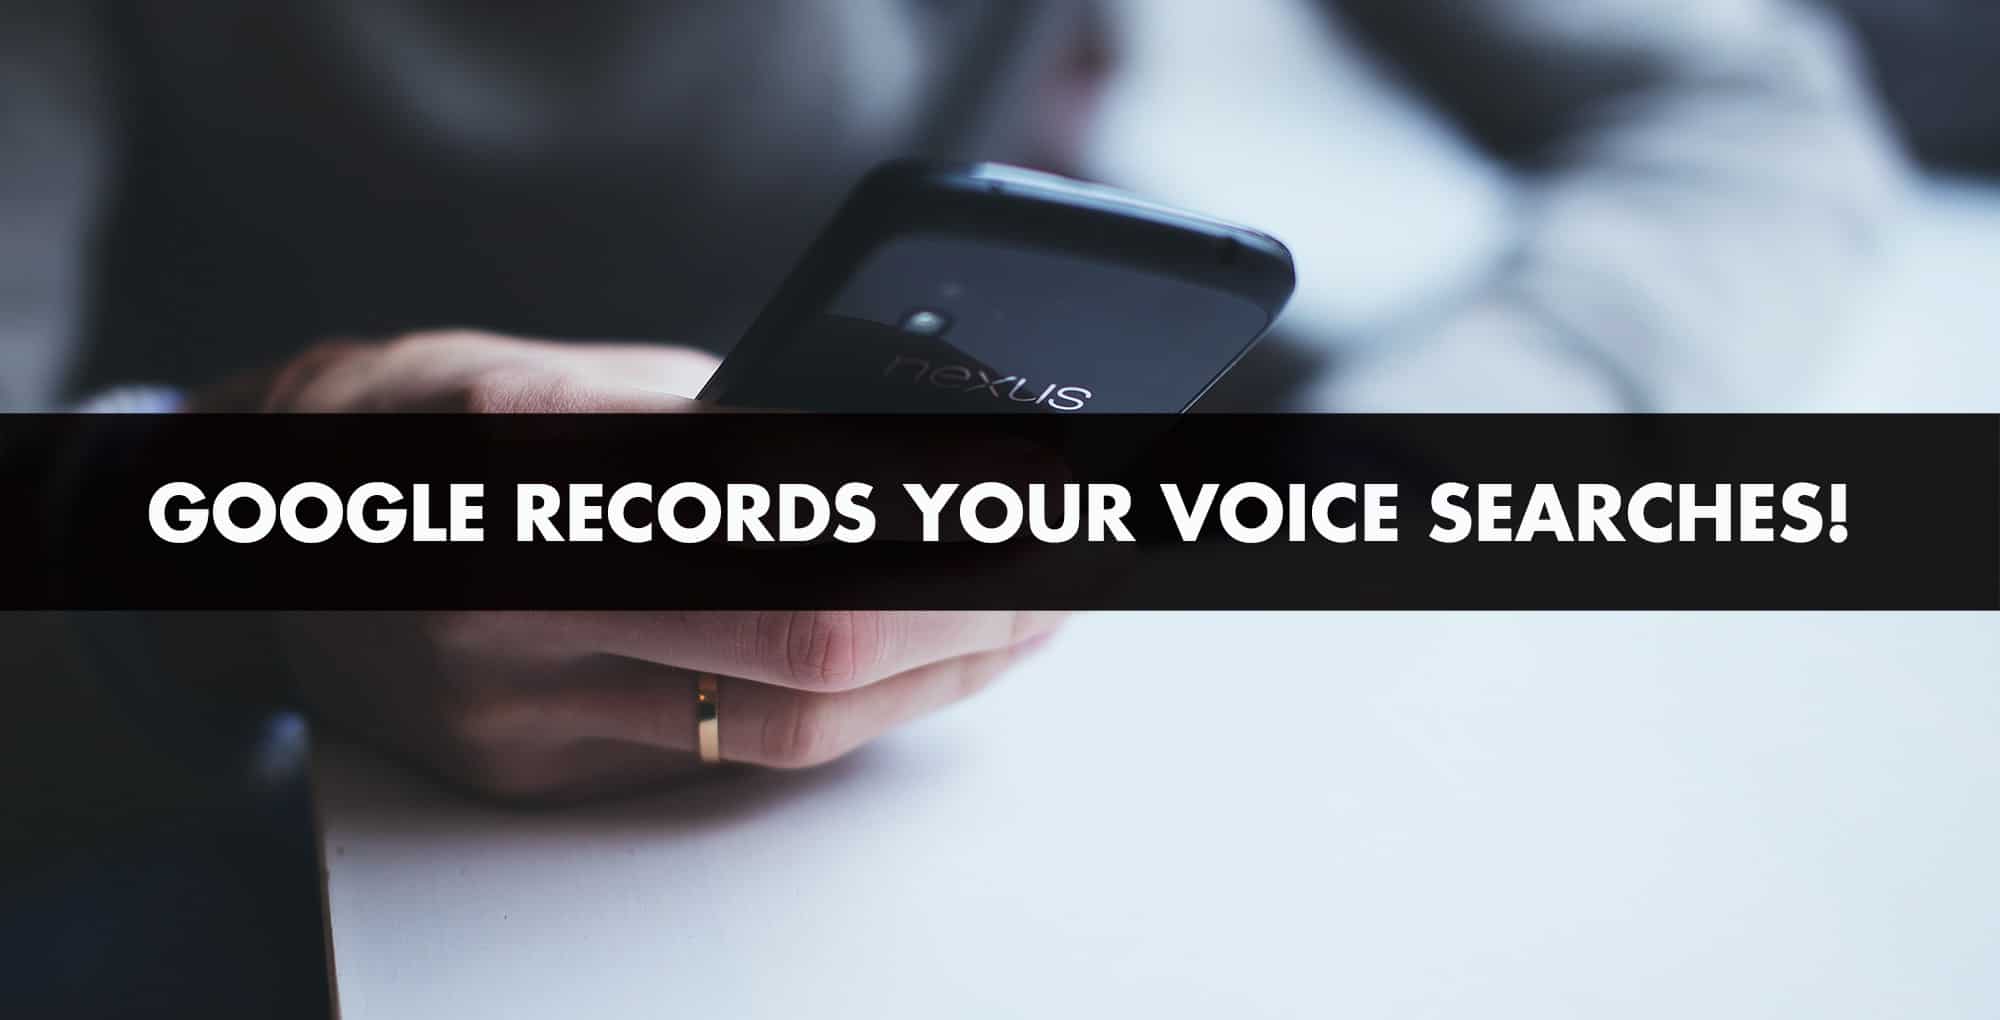 How To Find Your Entire Google Voice Search History